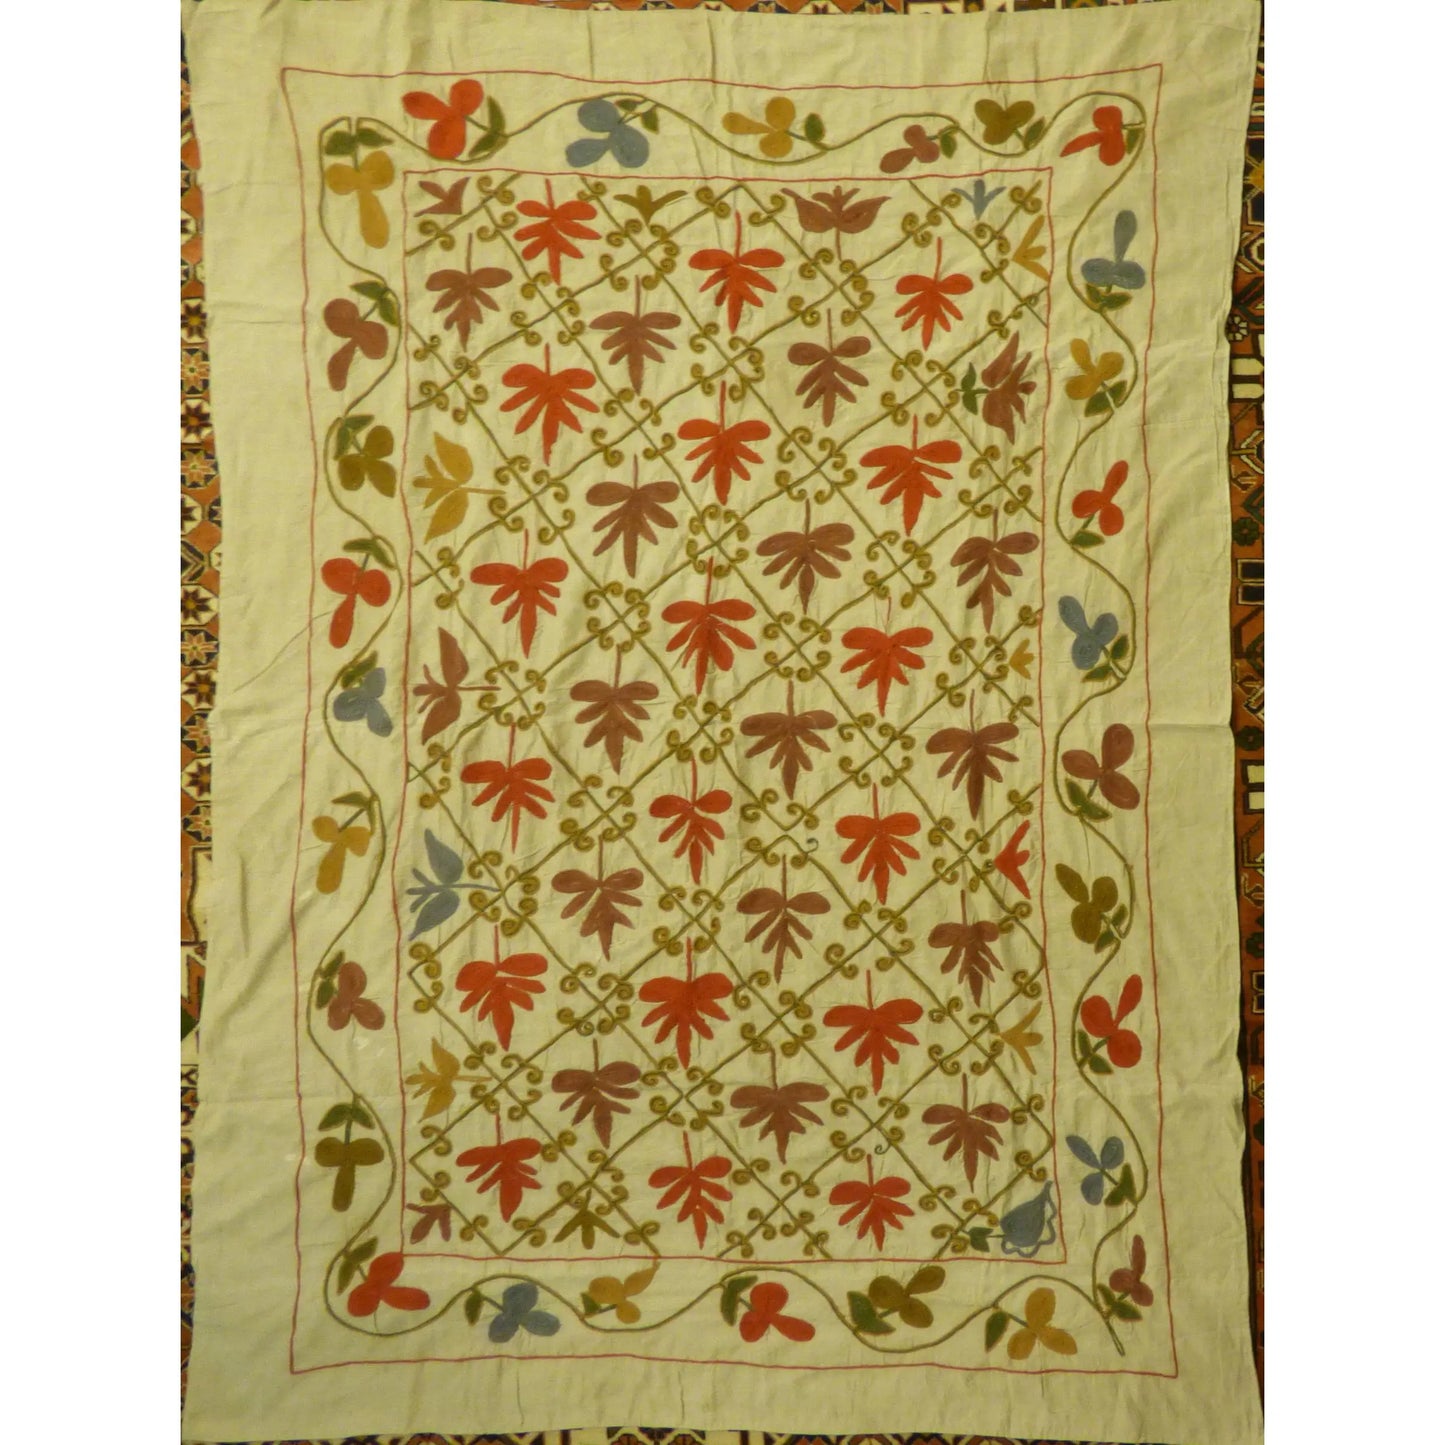 Fine Art Handmade Afghanistan Cotton Ready To Hang For Home Wall Art Decoration   72"  X  51" Panwd0004